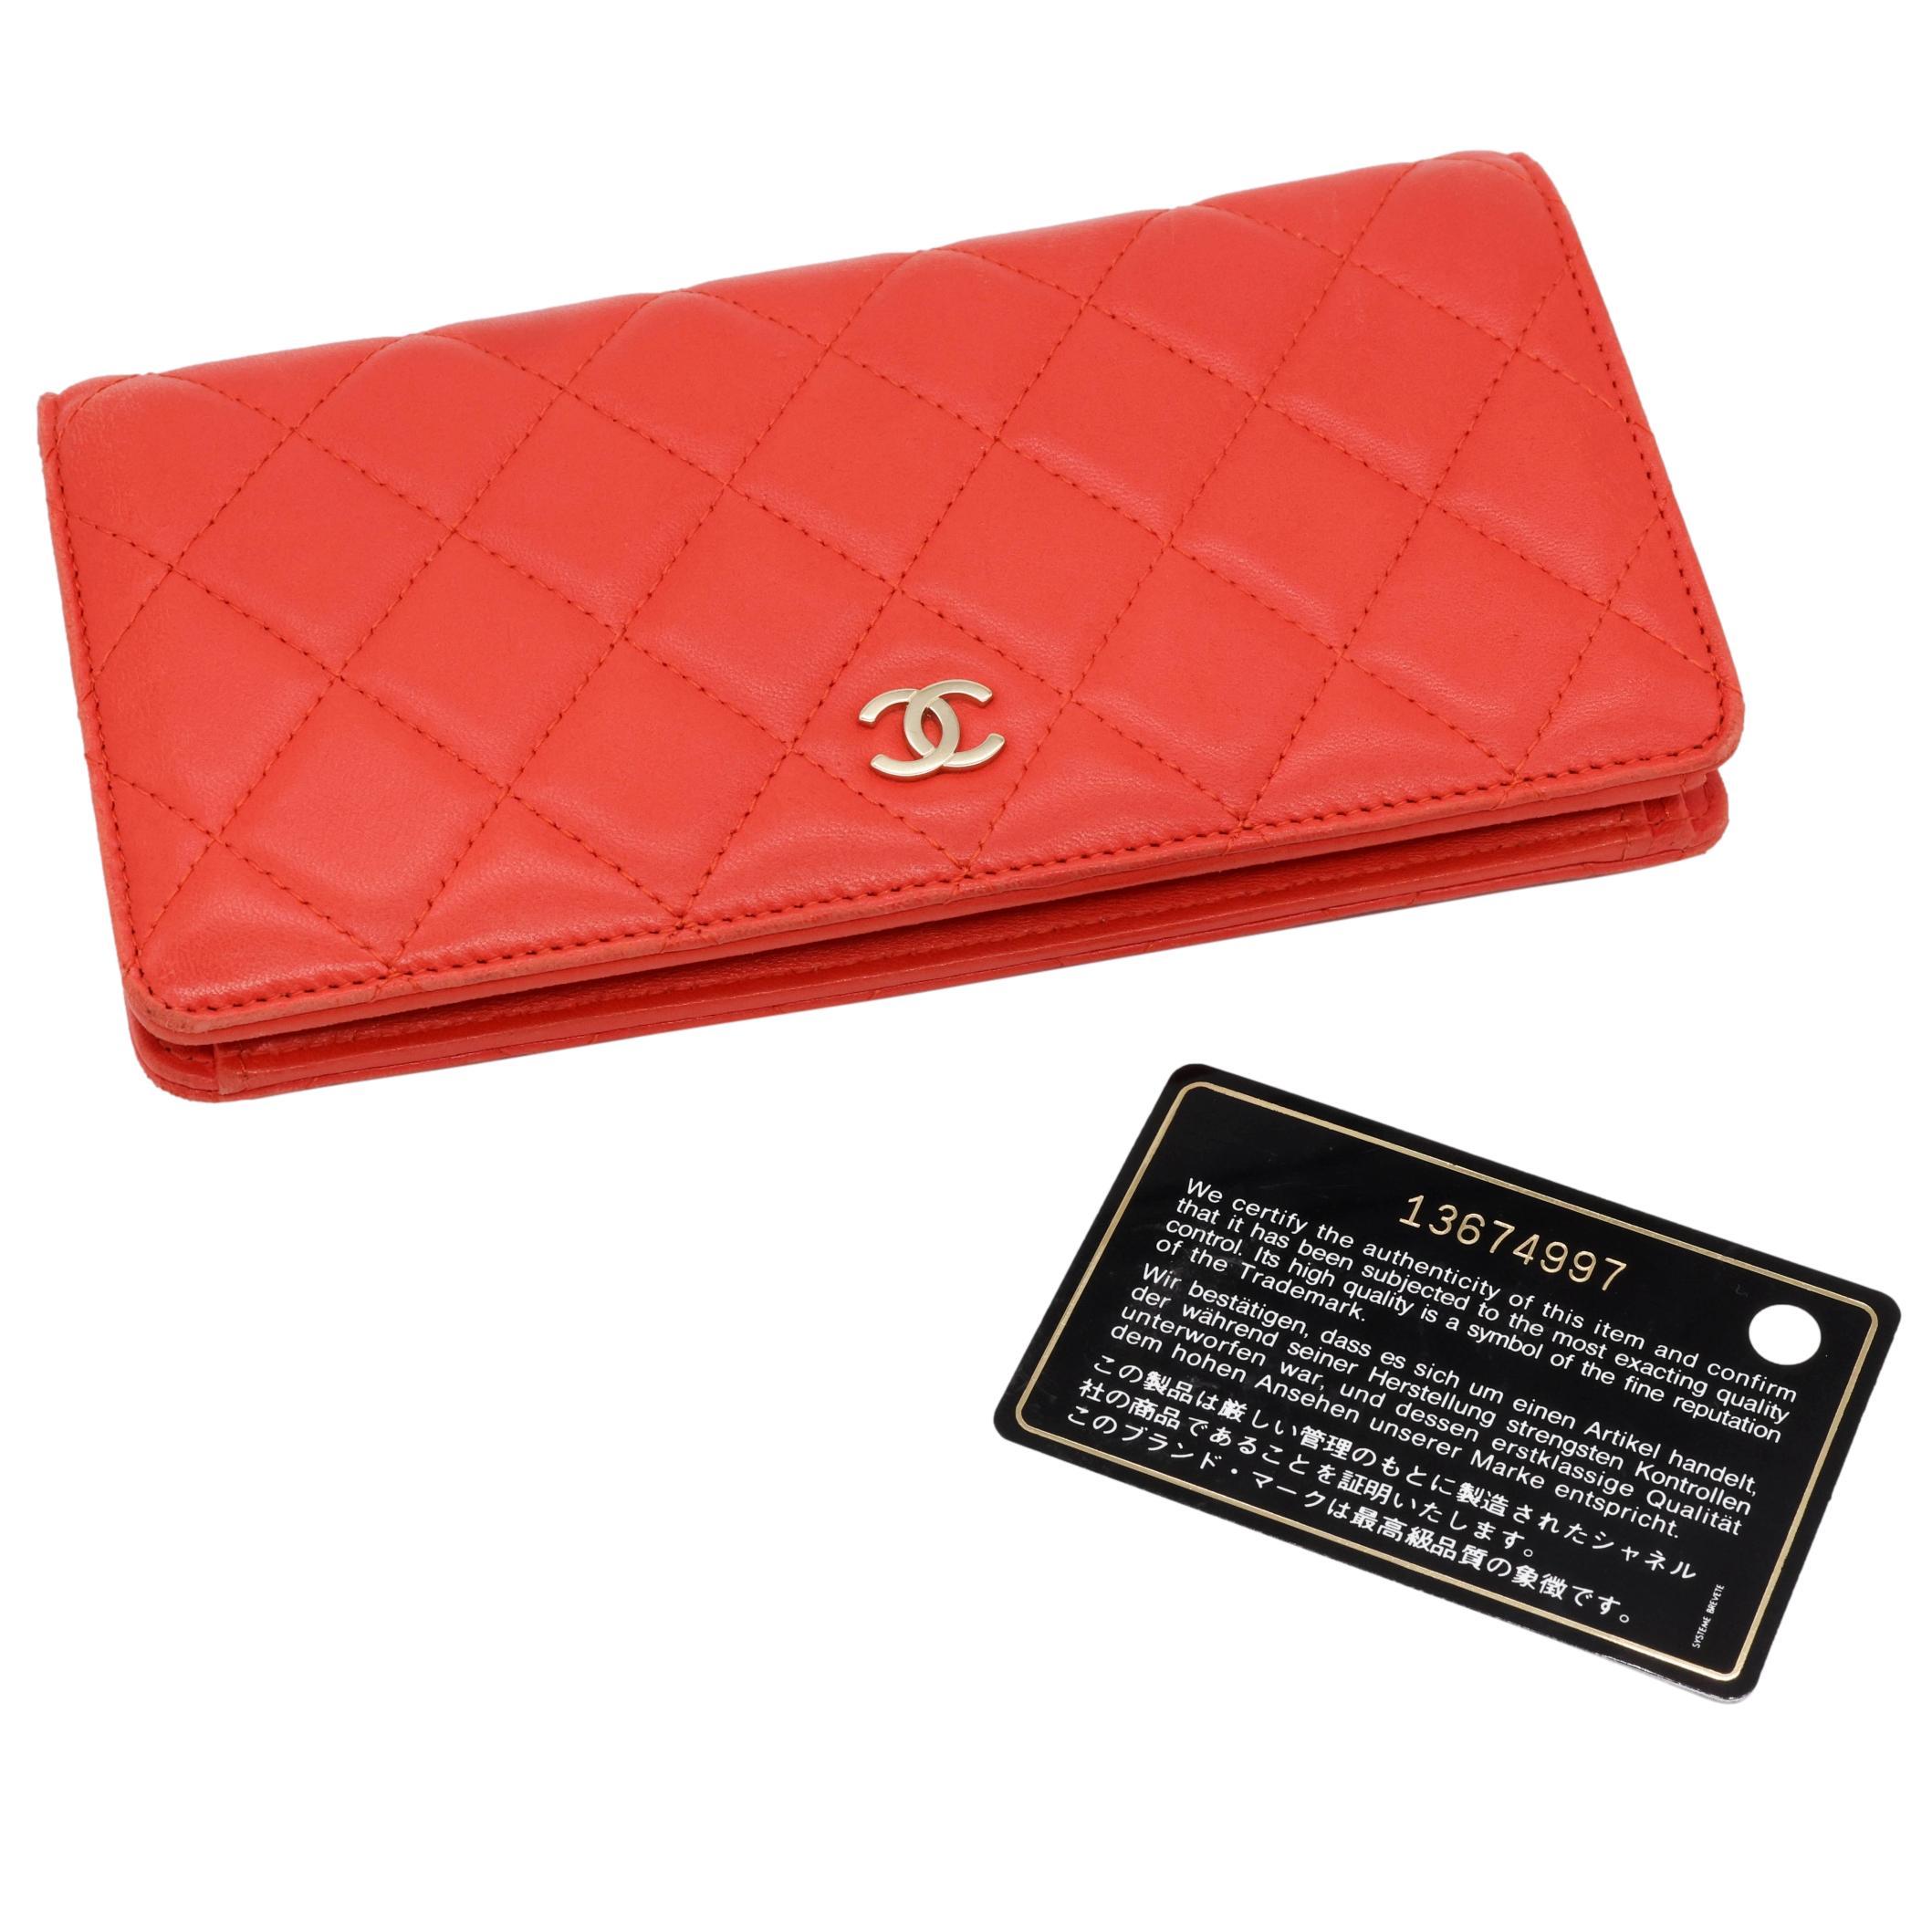 Chanel Quilted Coral Lambskin Leather Yen Continental Wallet, 2009 - 2010. 7